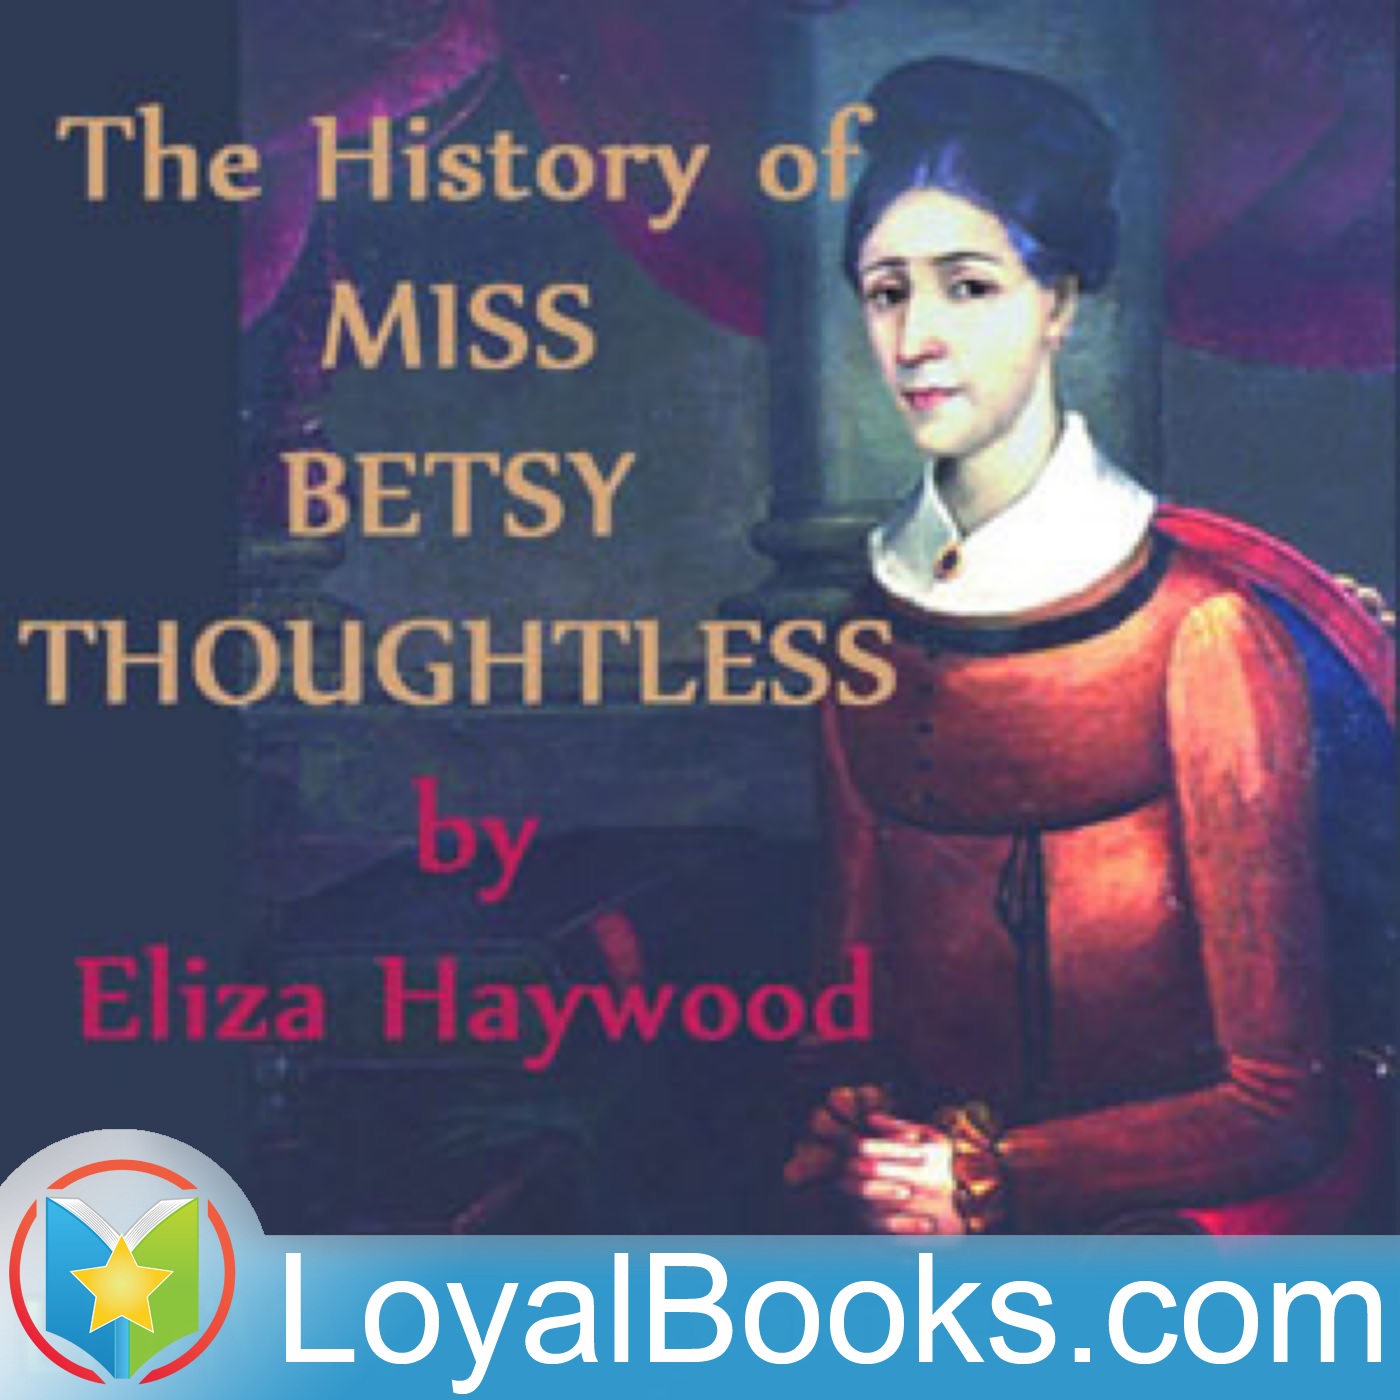 The History of Miss Betsy Thoughtless, Volume 1 by Eliza Haywood